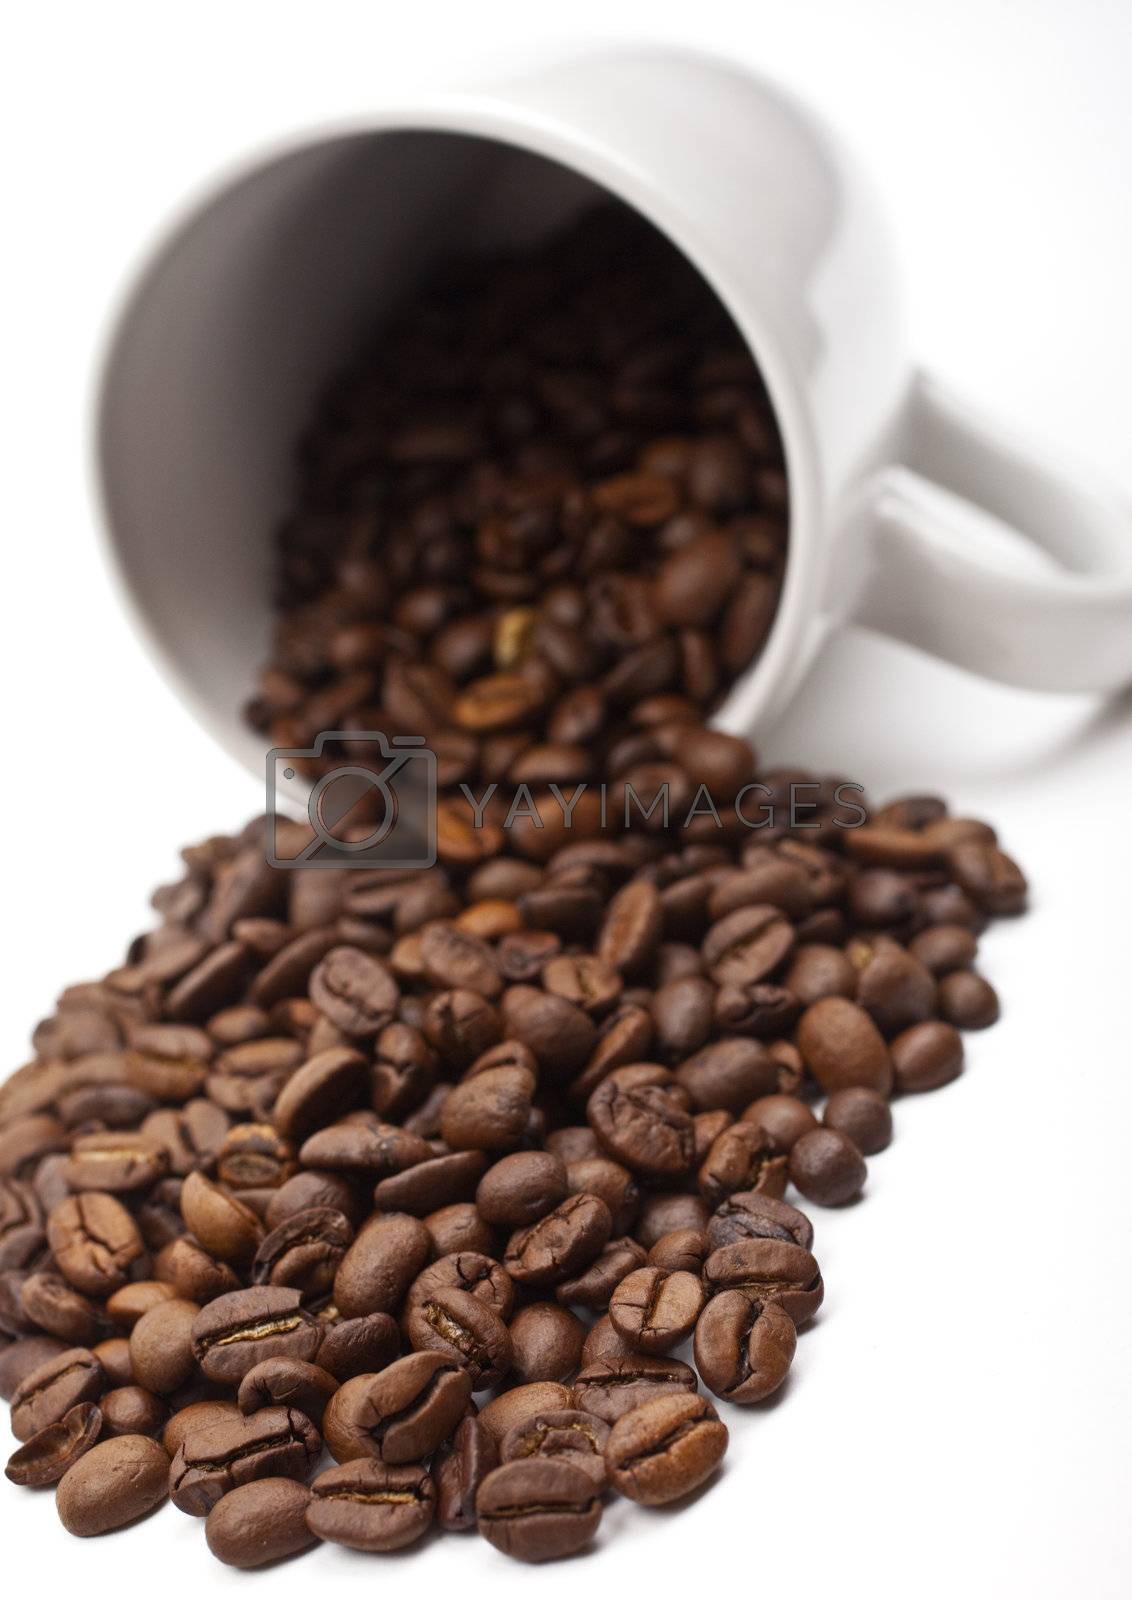 Royalty free image of Coffee Beans and Mug by chrisdorney